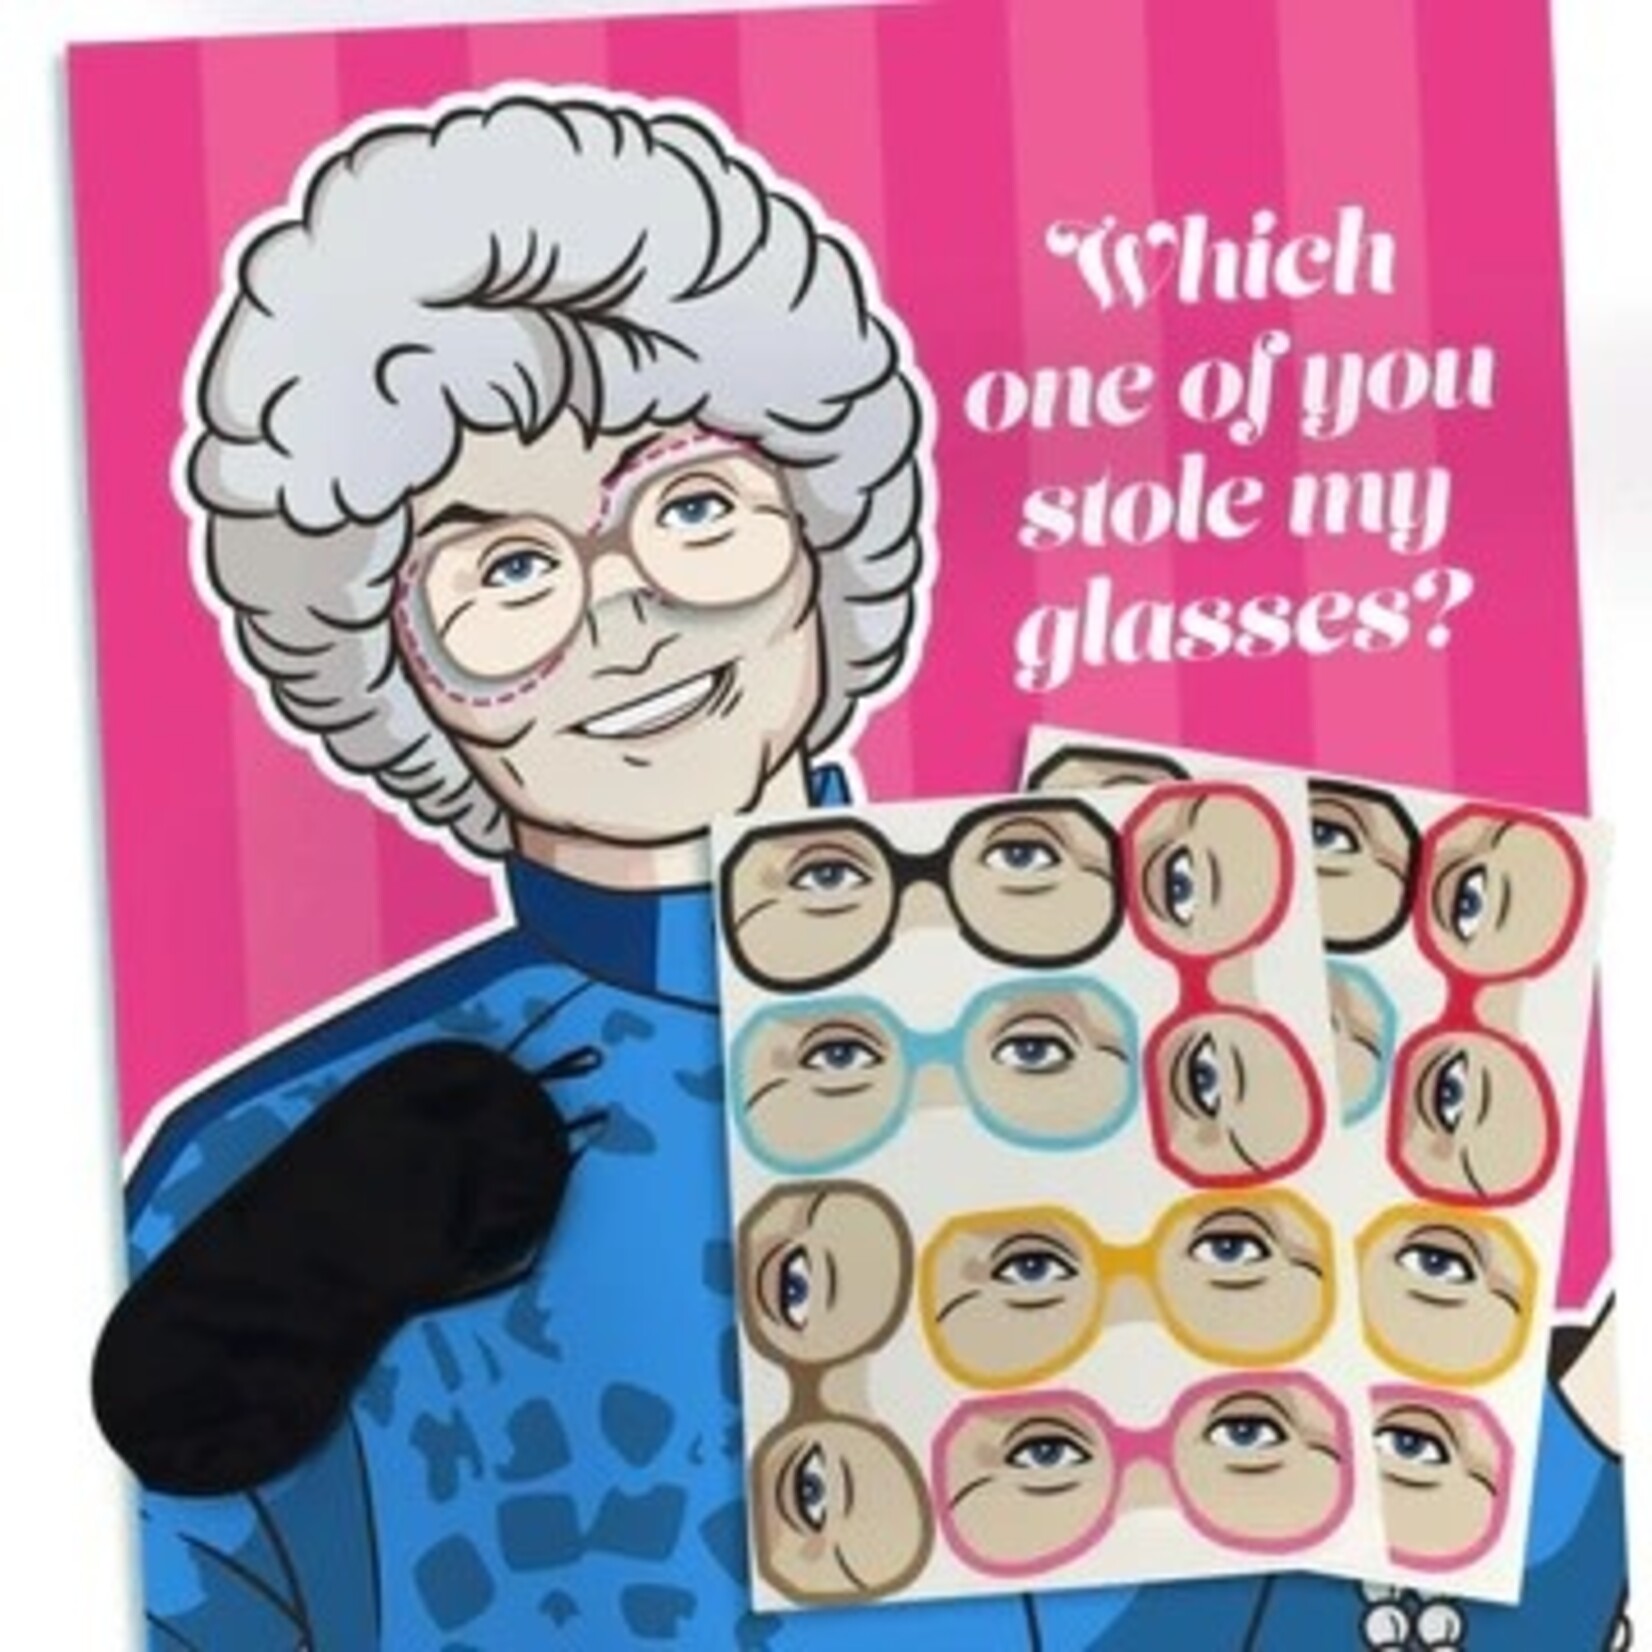 Prime Party The Golden Girls "Pin The Glasses" Party Game - 12ct.